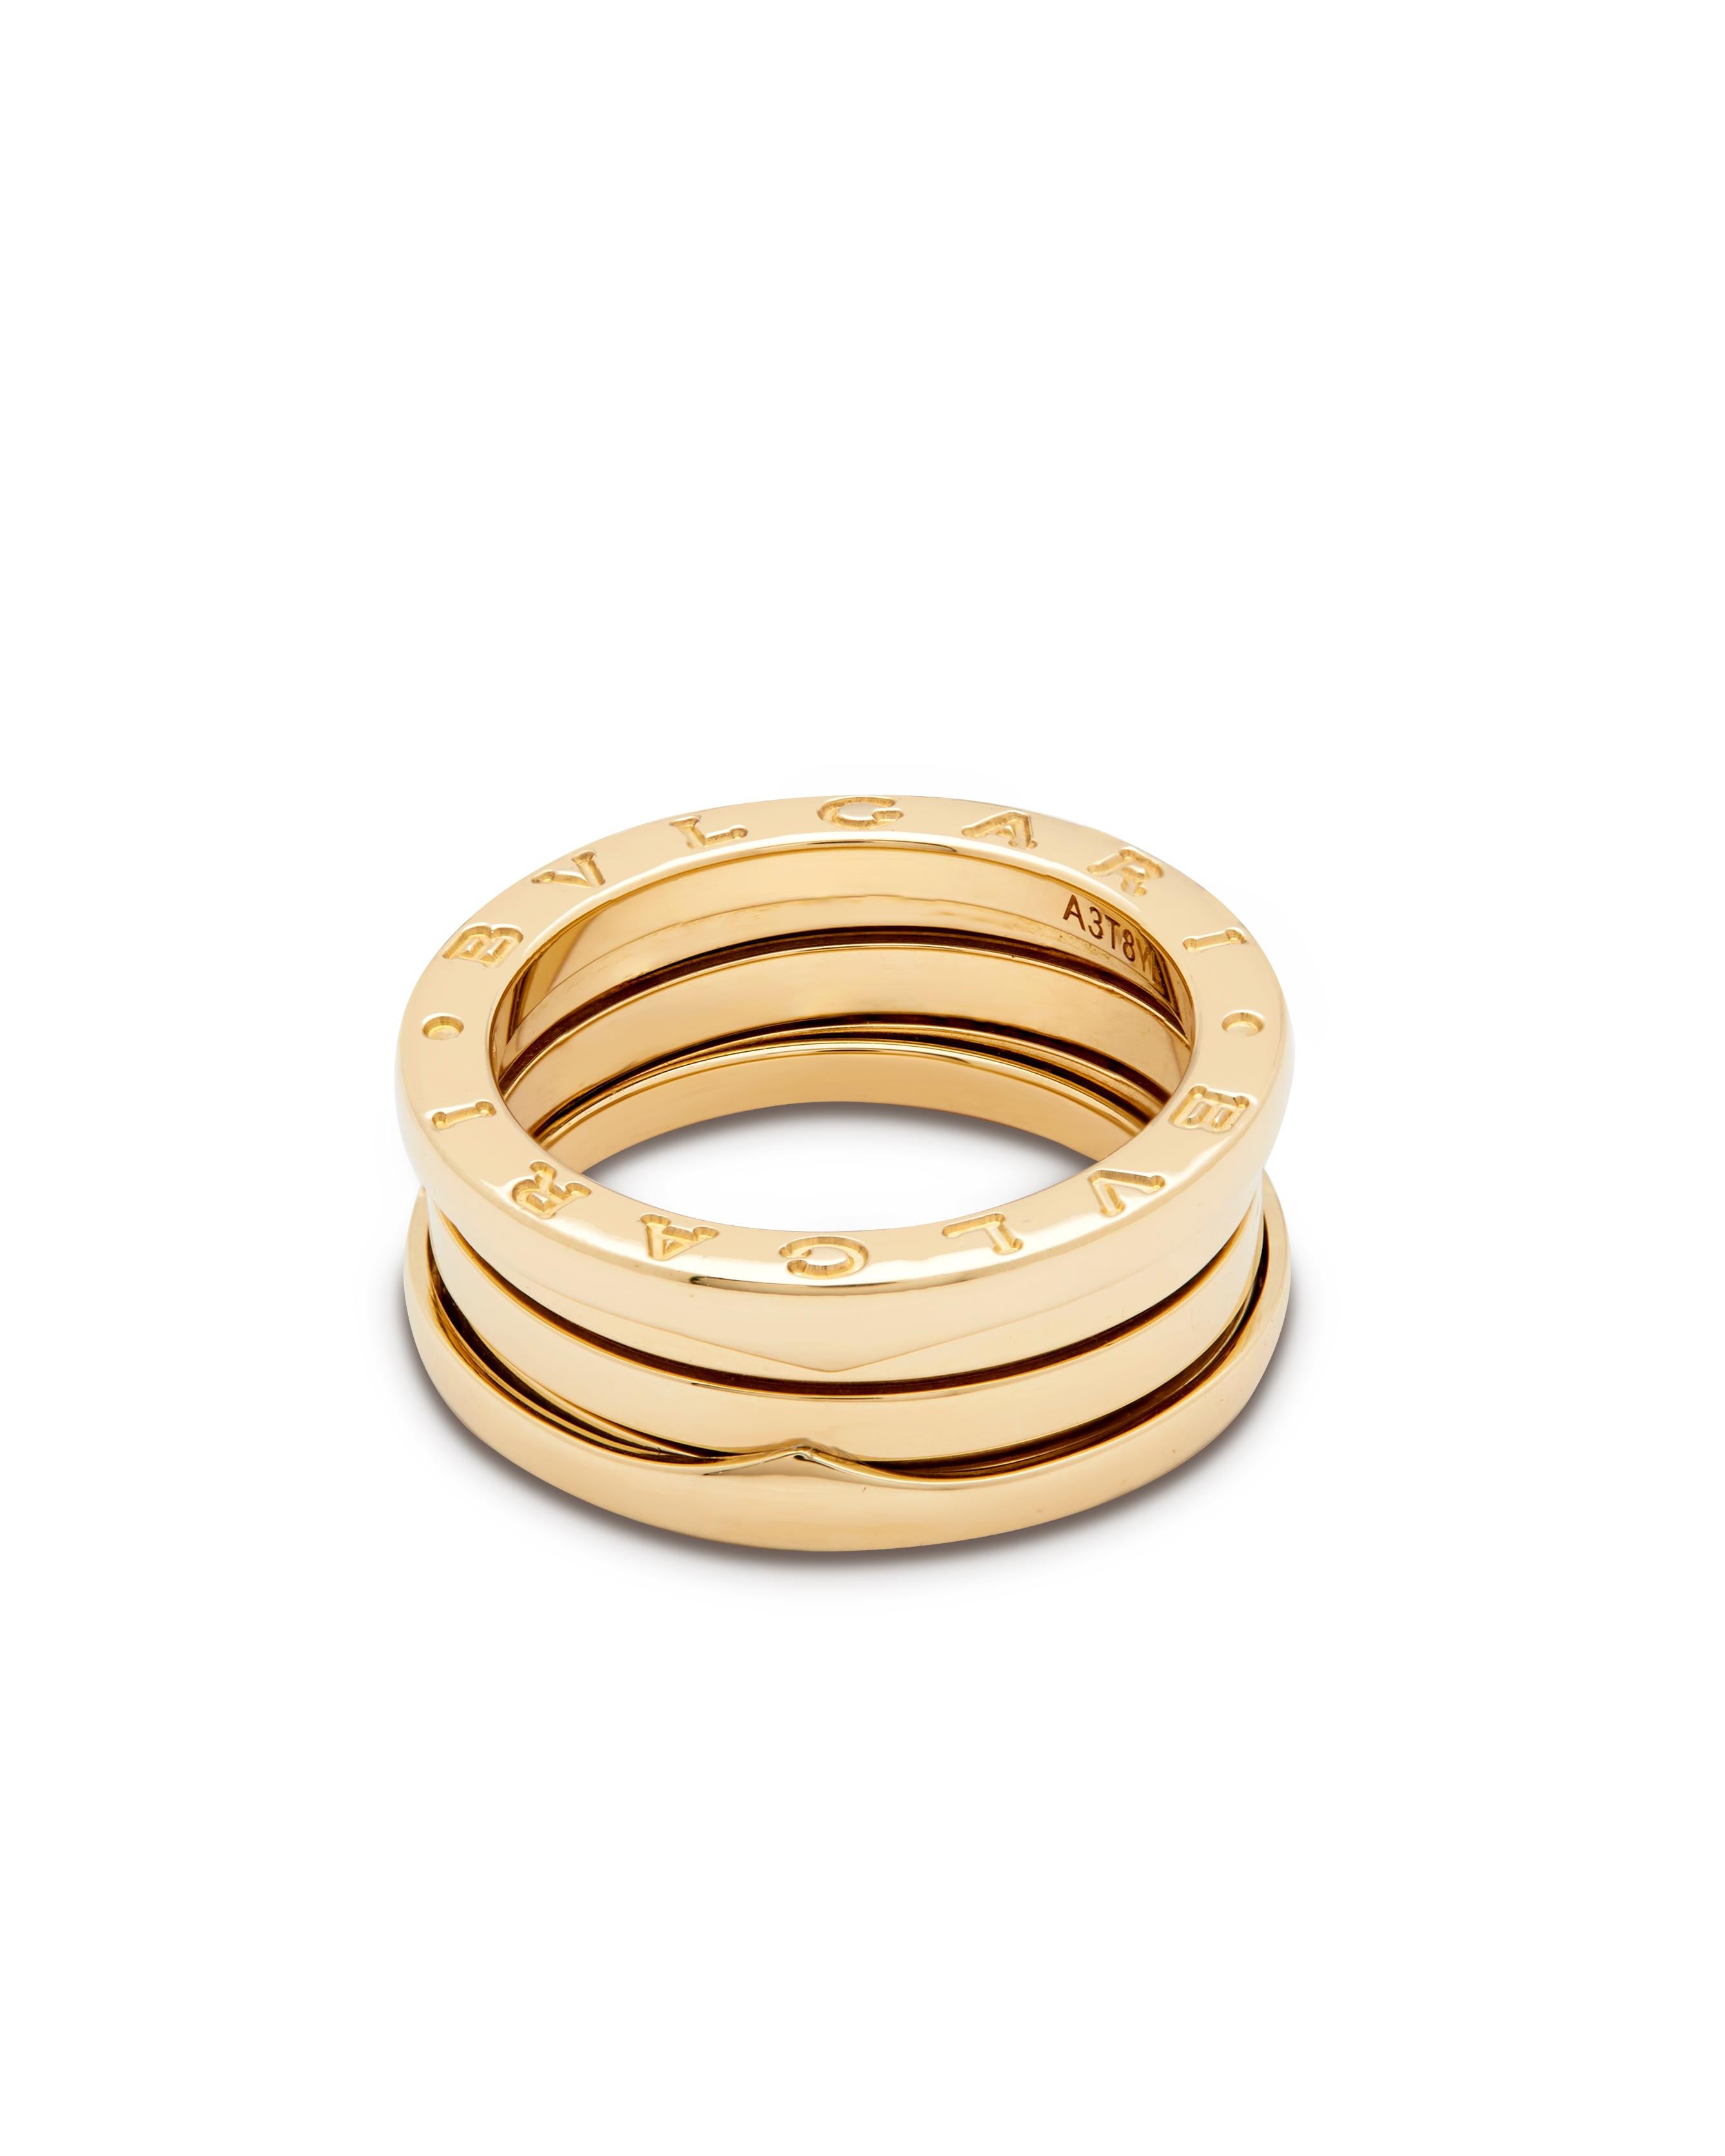 Beautiful Pre-owned Bulgari B-Zero ring, rose gold, and ode to Italian architecture, taking inspiration from the famous Colosseum. A Classic and elegant ring suitable for daily wear.

The purity of its distinctive spiral design, is a metaphor for